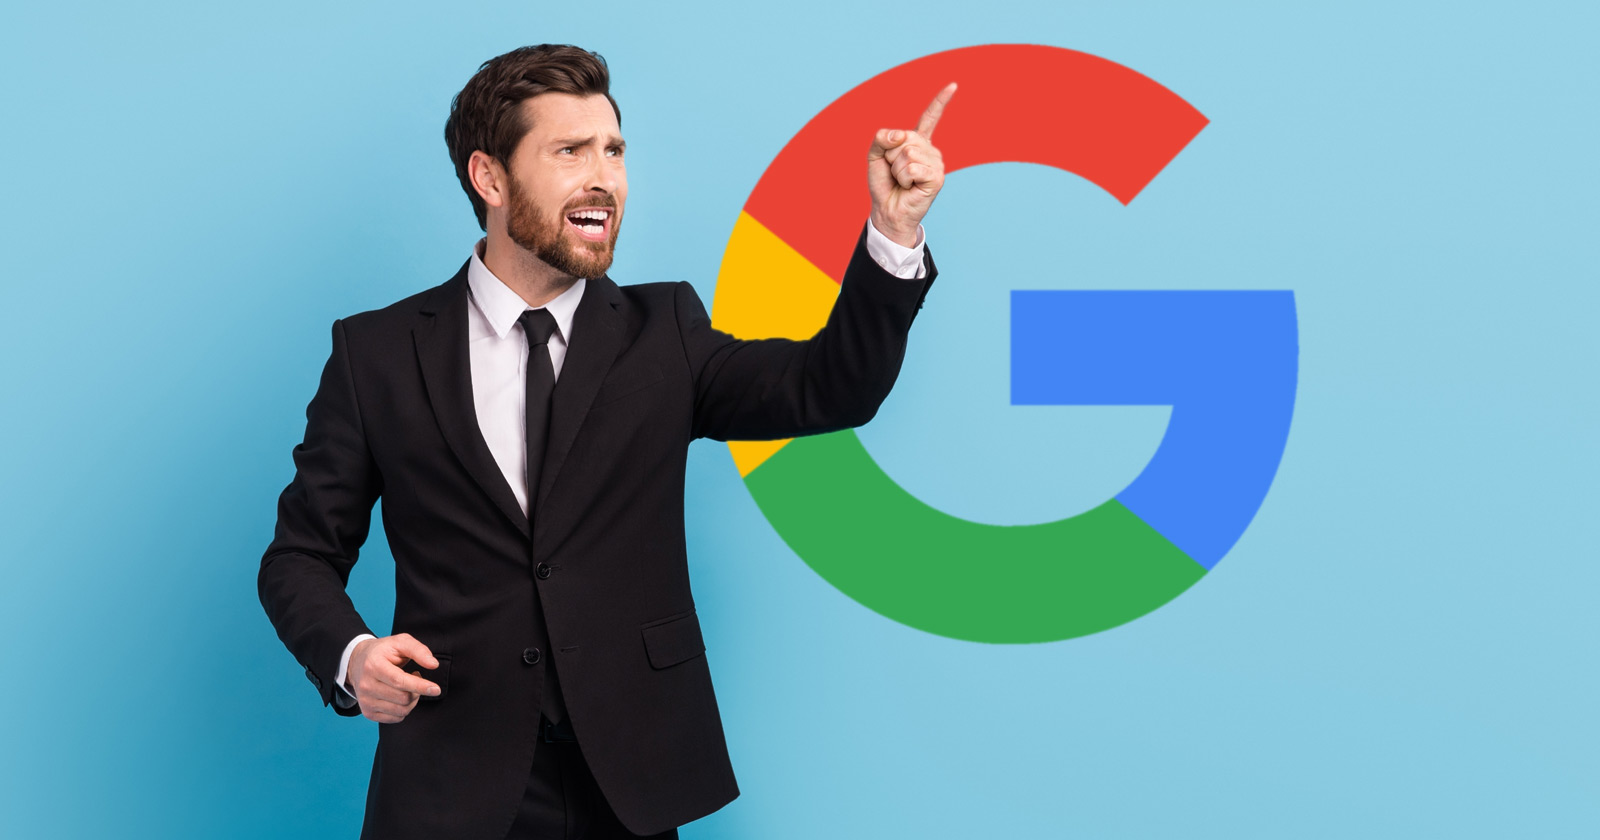 Google responds to fallout from accusations of outcompeting publisher with their own content